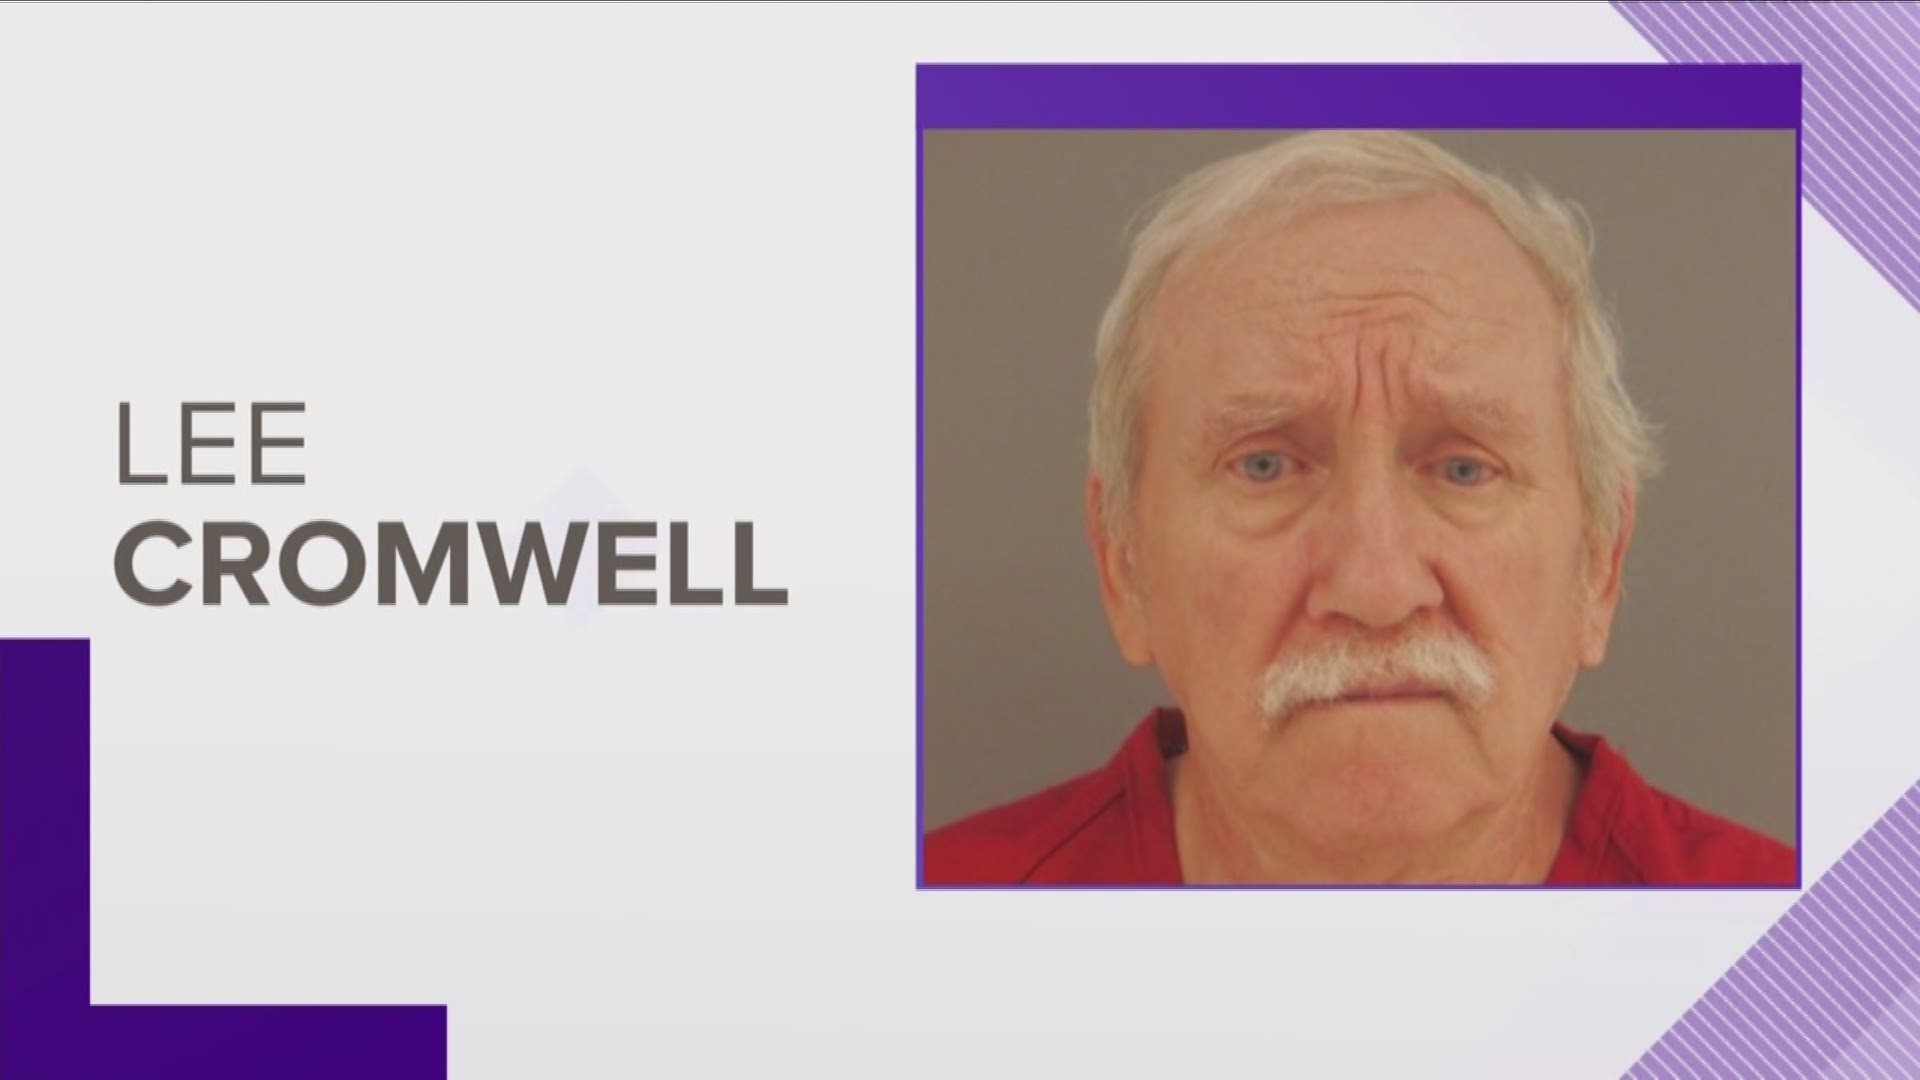 Cromwell, 68, was convicted of vehicular homicide for the death of James Robinson and remains in prison on that charge.